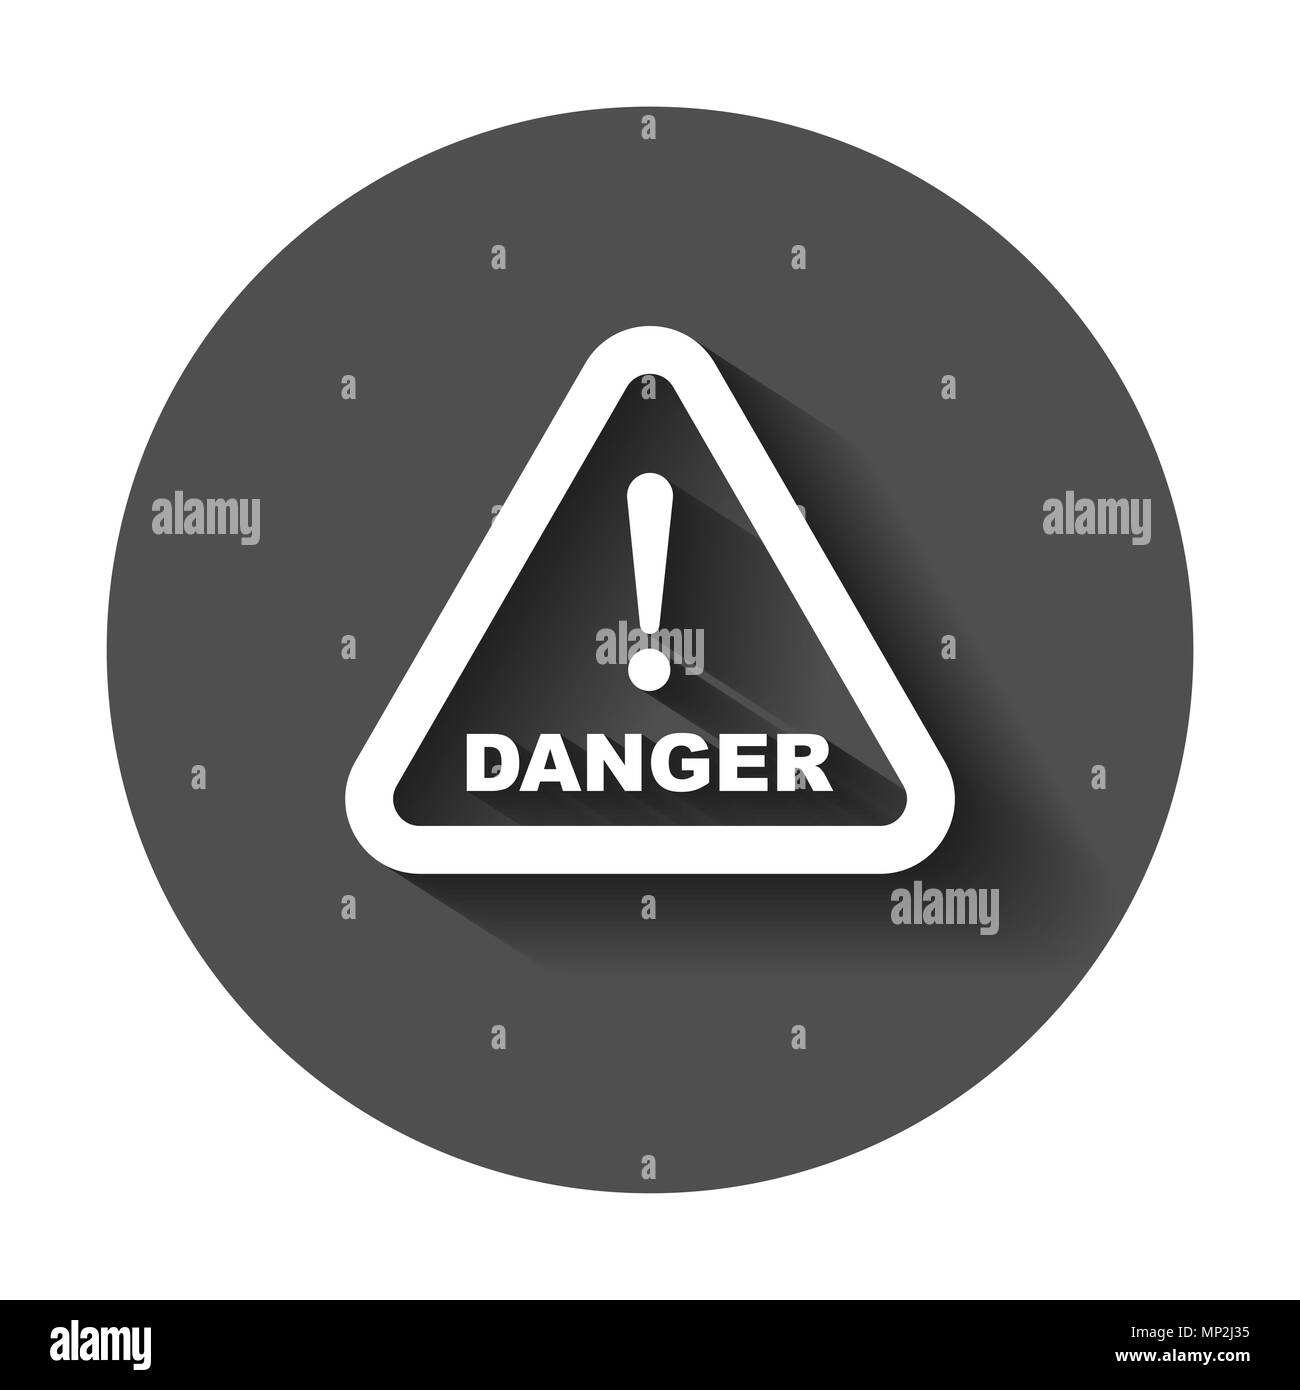 Danger sign vector icon. Attention caution illustration. Business concept simple flat pictogram with long shadow. Stock Vector